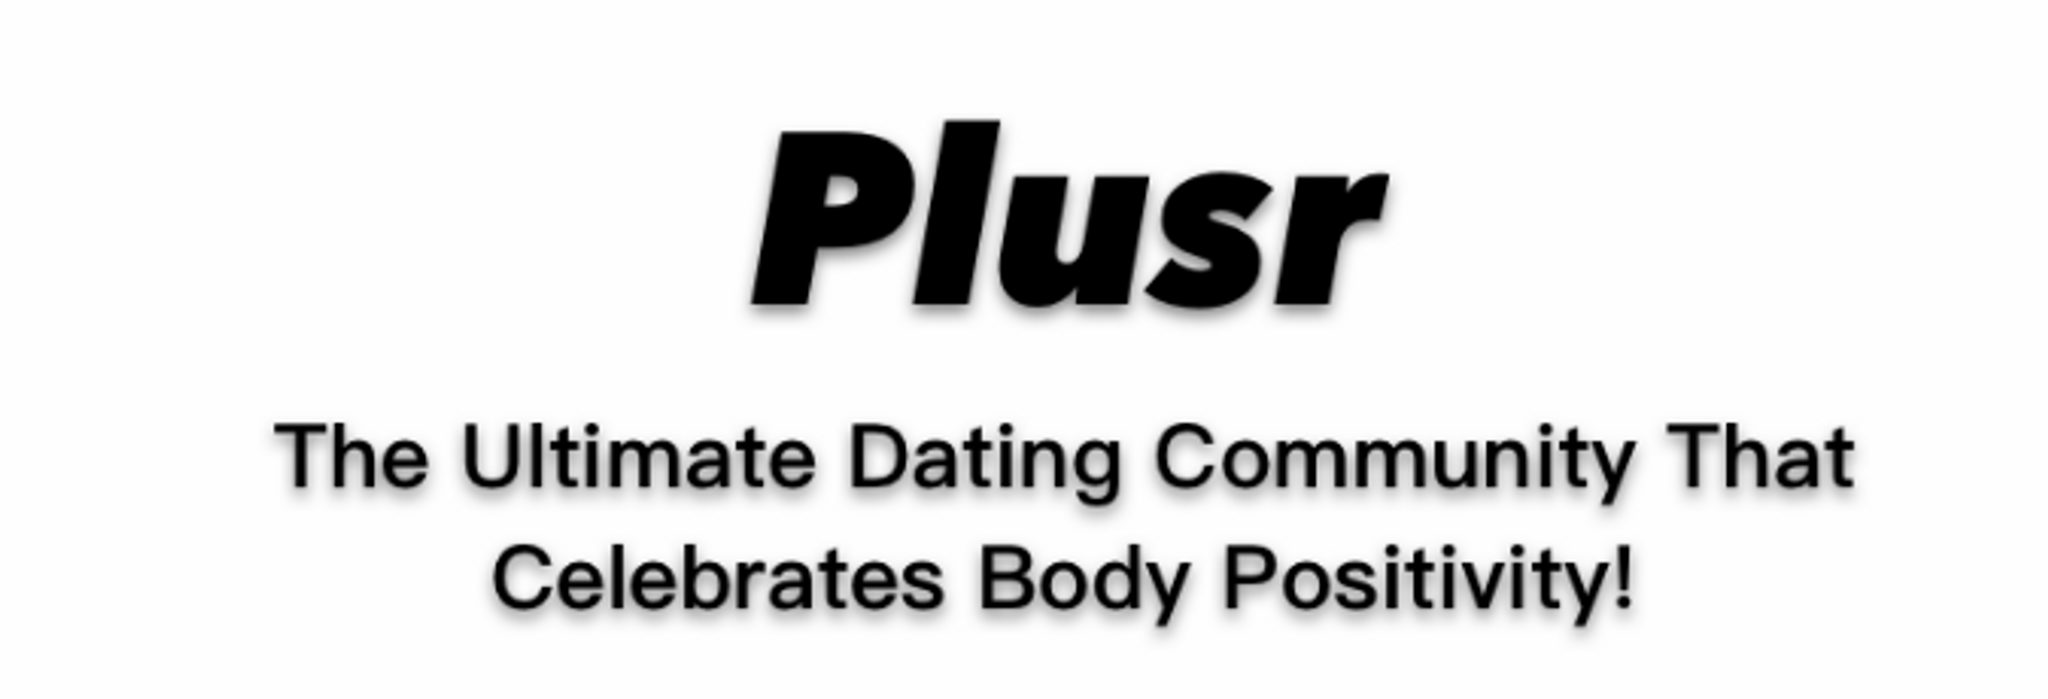 Plusr is the ultimate hookup community that promotes body positivity